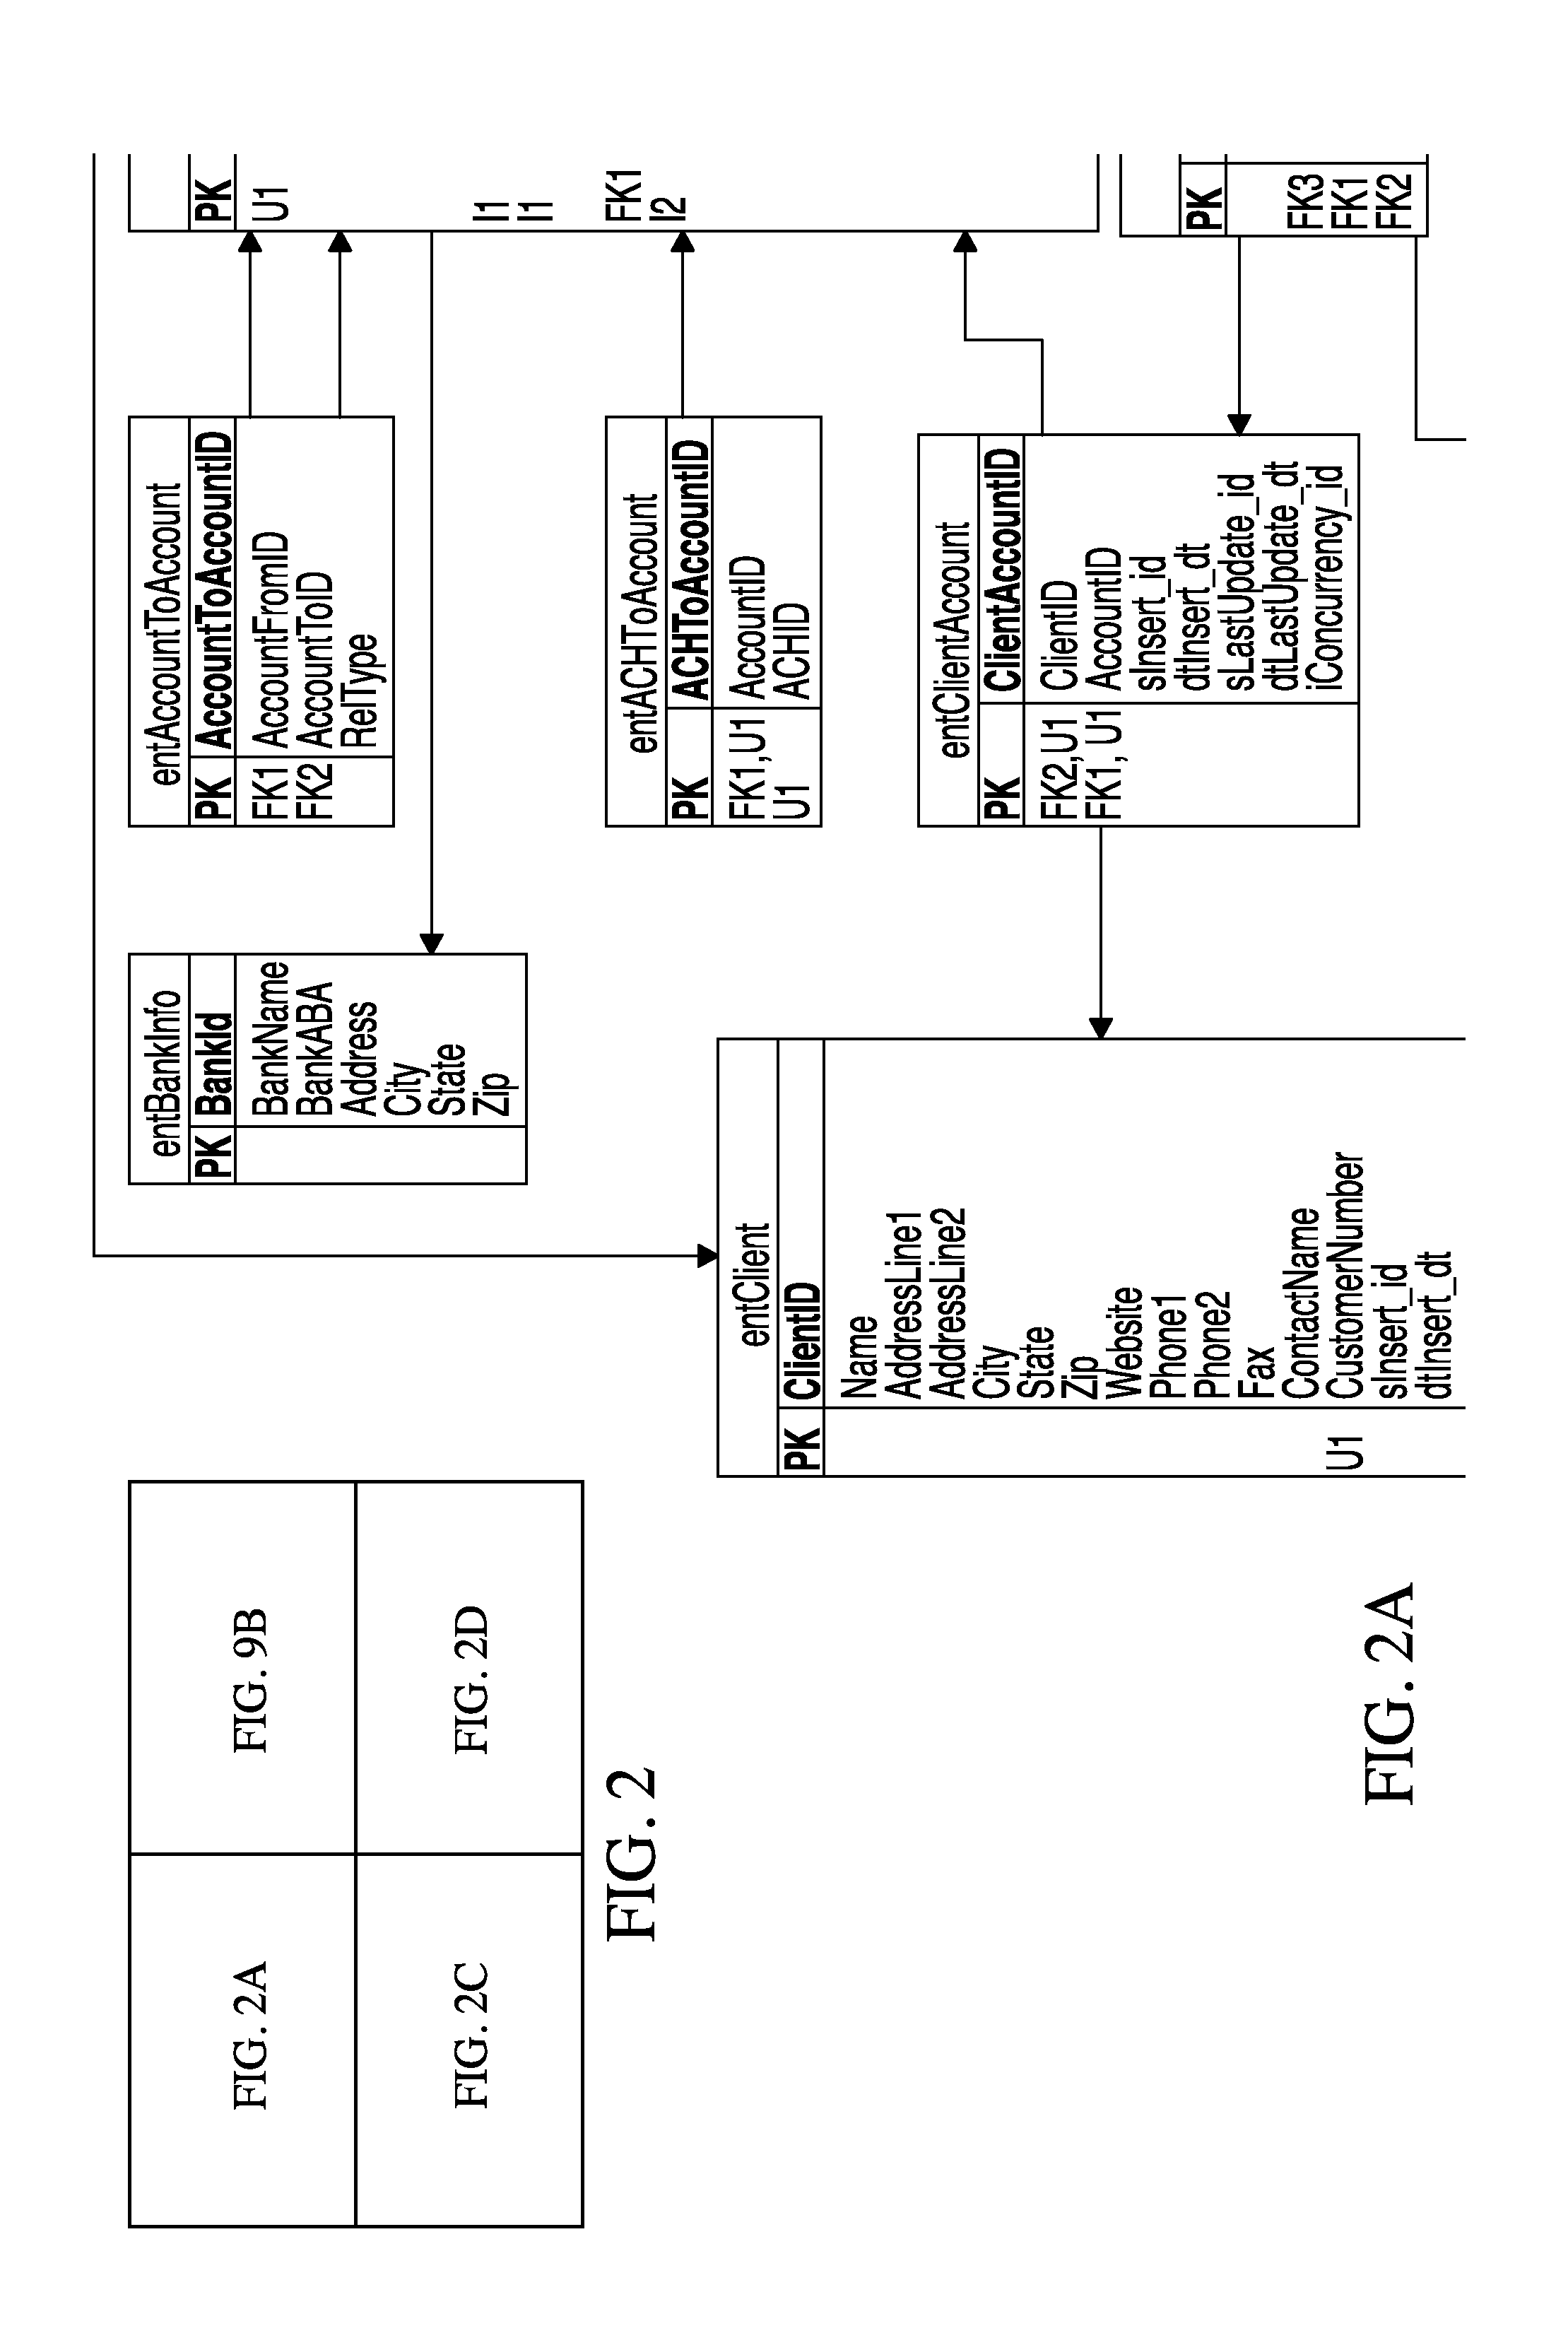 Systems and Methods for Processing Banking Transactions